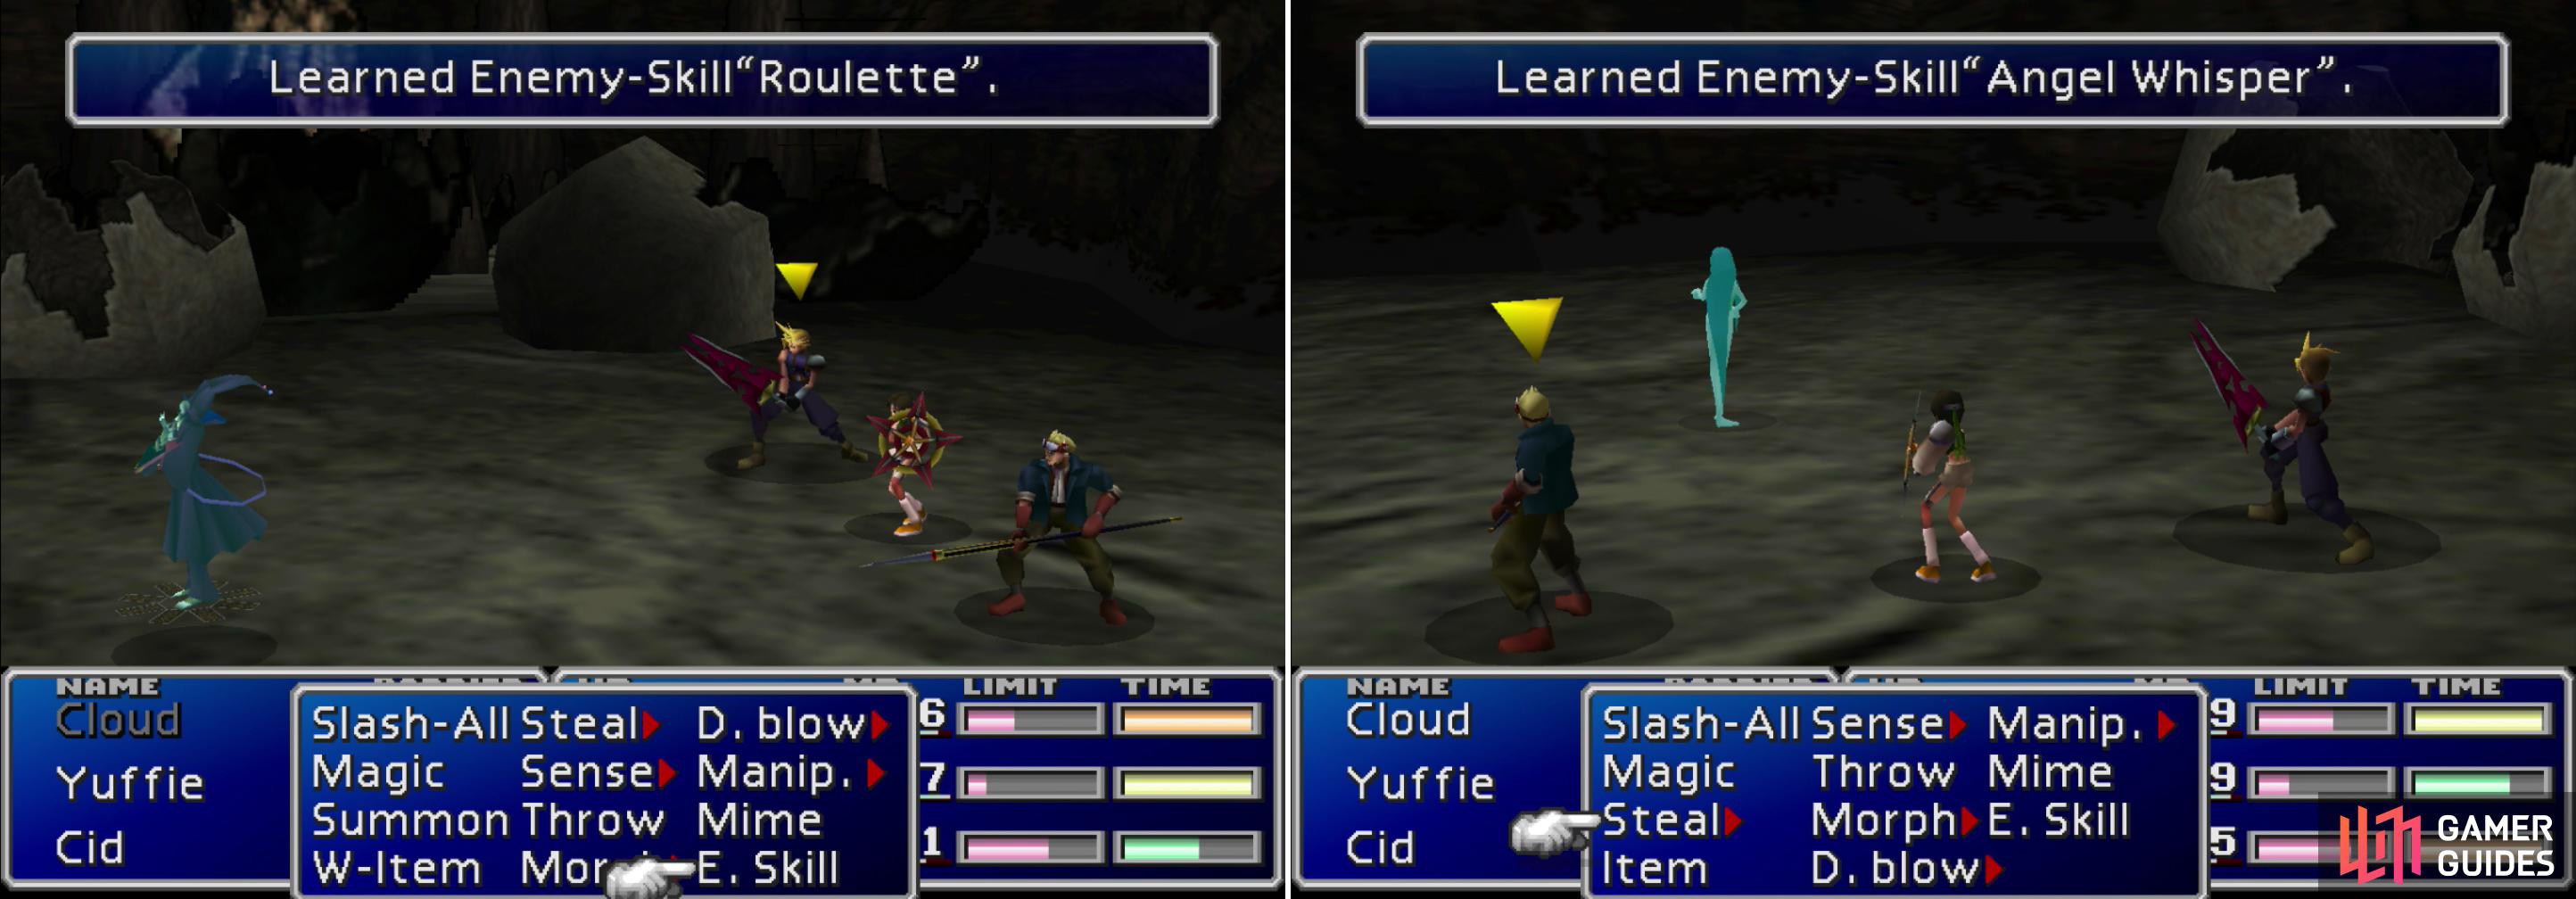 Learn the “Roulette” Enemy Skill from the Death Dealer (left) and the more useful “Angel Whisper” Enemy Skill from the Pollensalta (right).